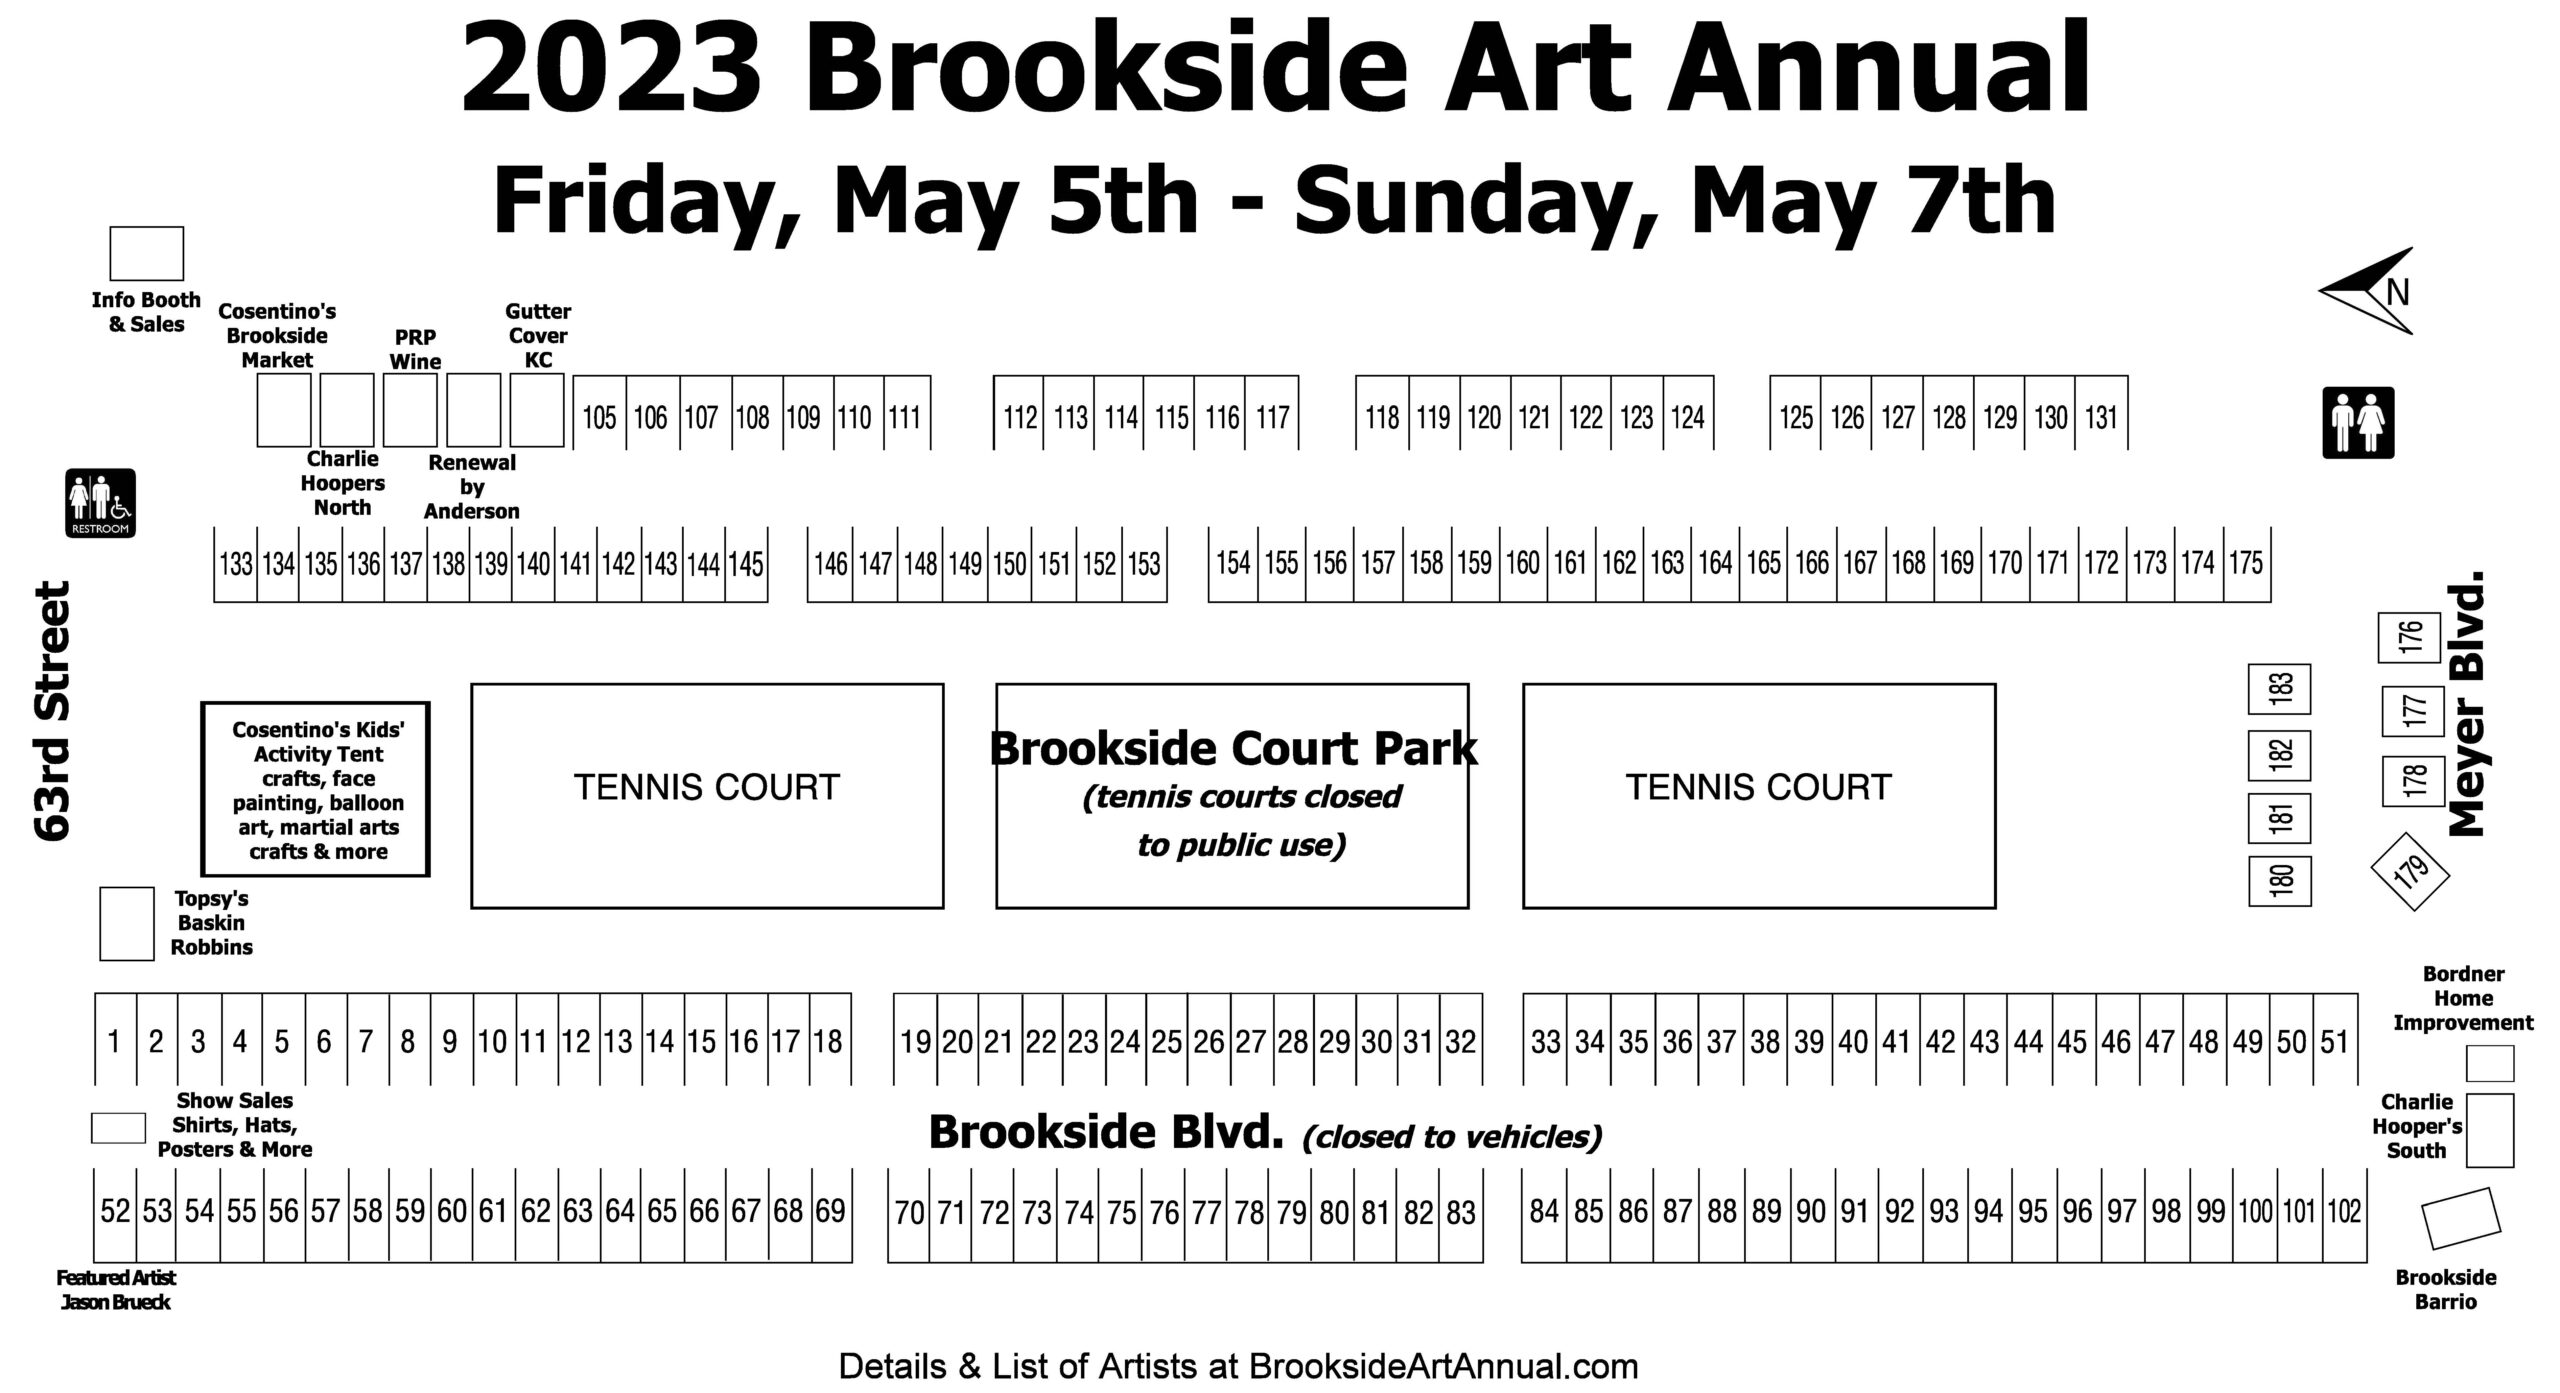 Show Map The 2023 Brookside Art Annual